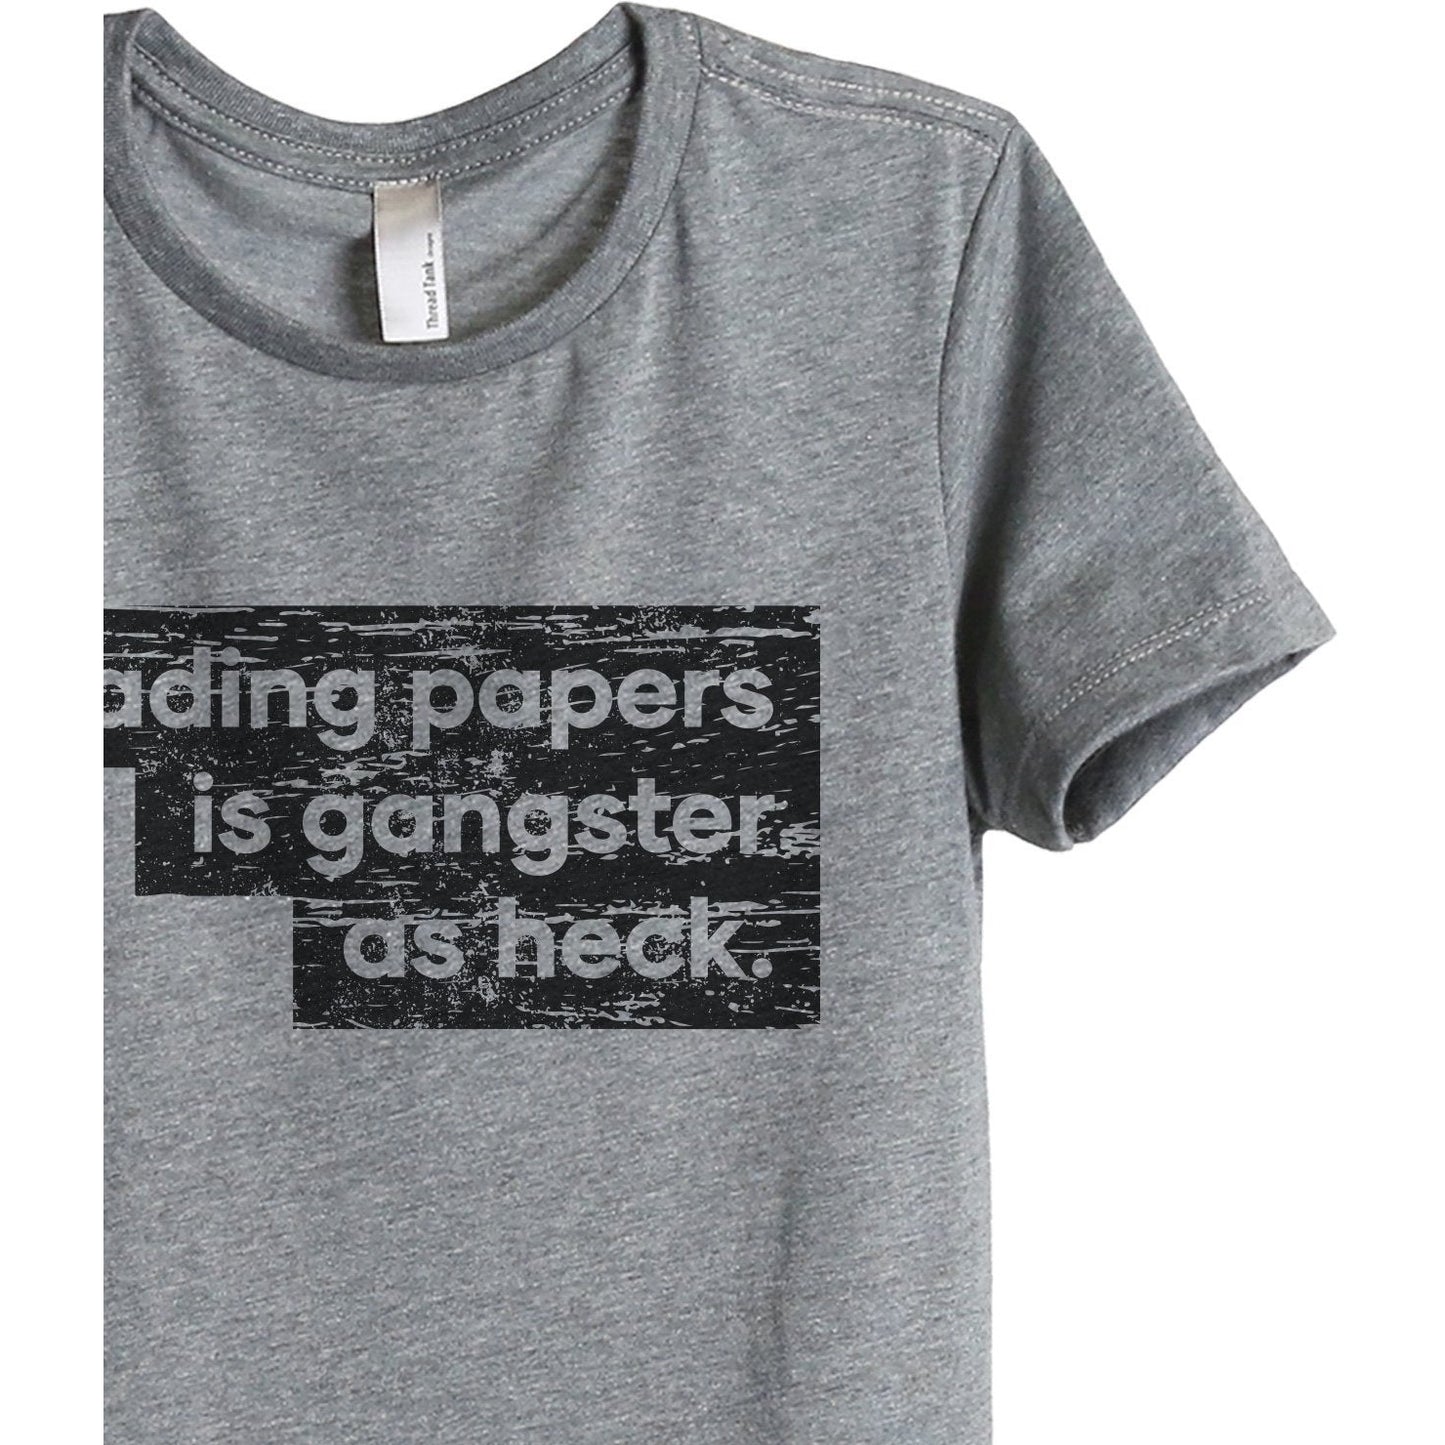 Grading Papers Is Gangster As Heck Women's Relaxed Crewneck T-Shirt Top Tee Heather Grey Zoom Details
